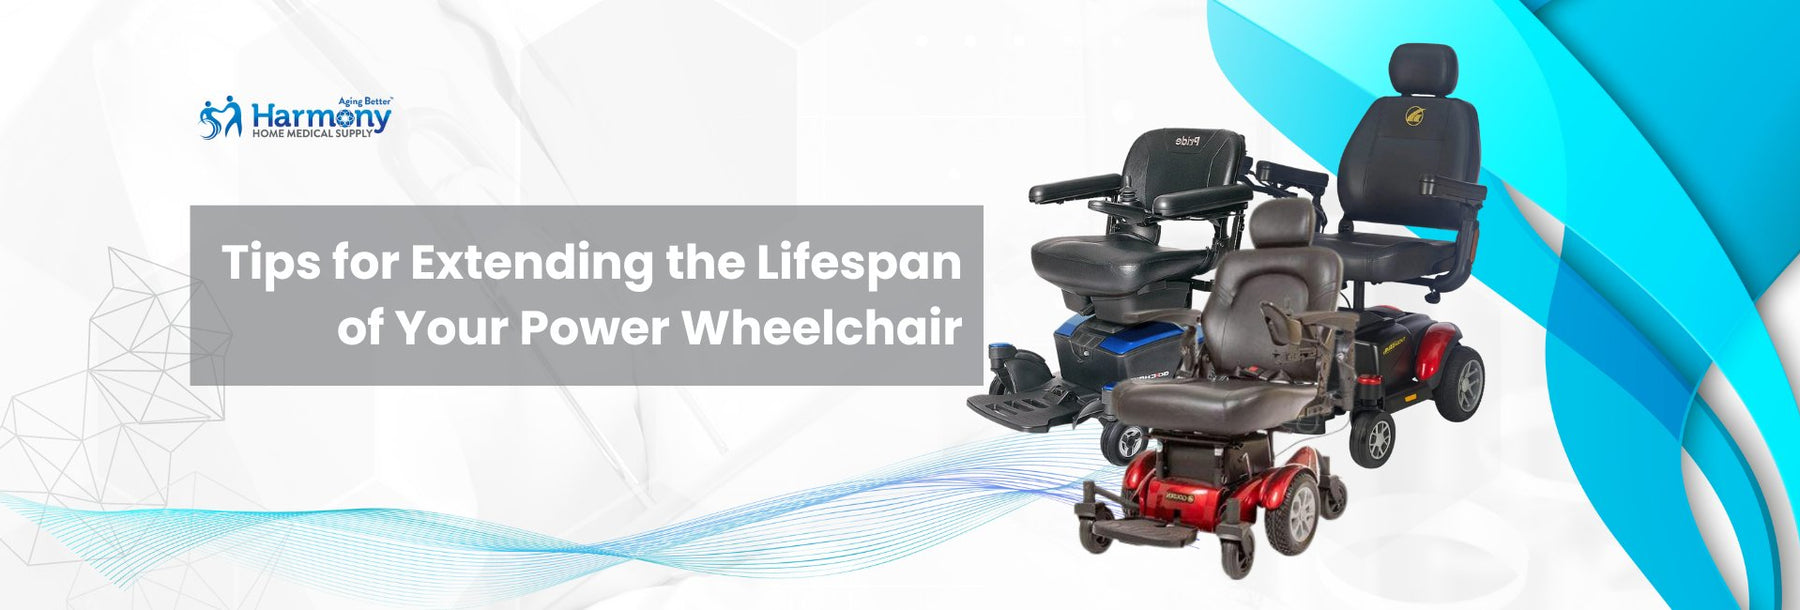 Tips for Extending the Lifespan of Your Power Wheelchair - Harmony Home Medical Supply